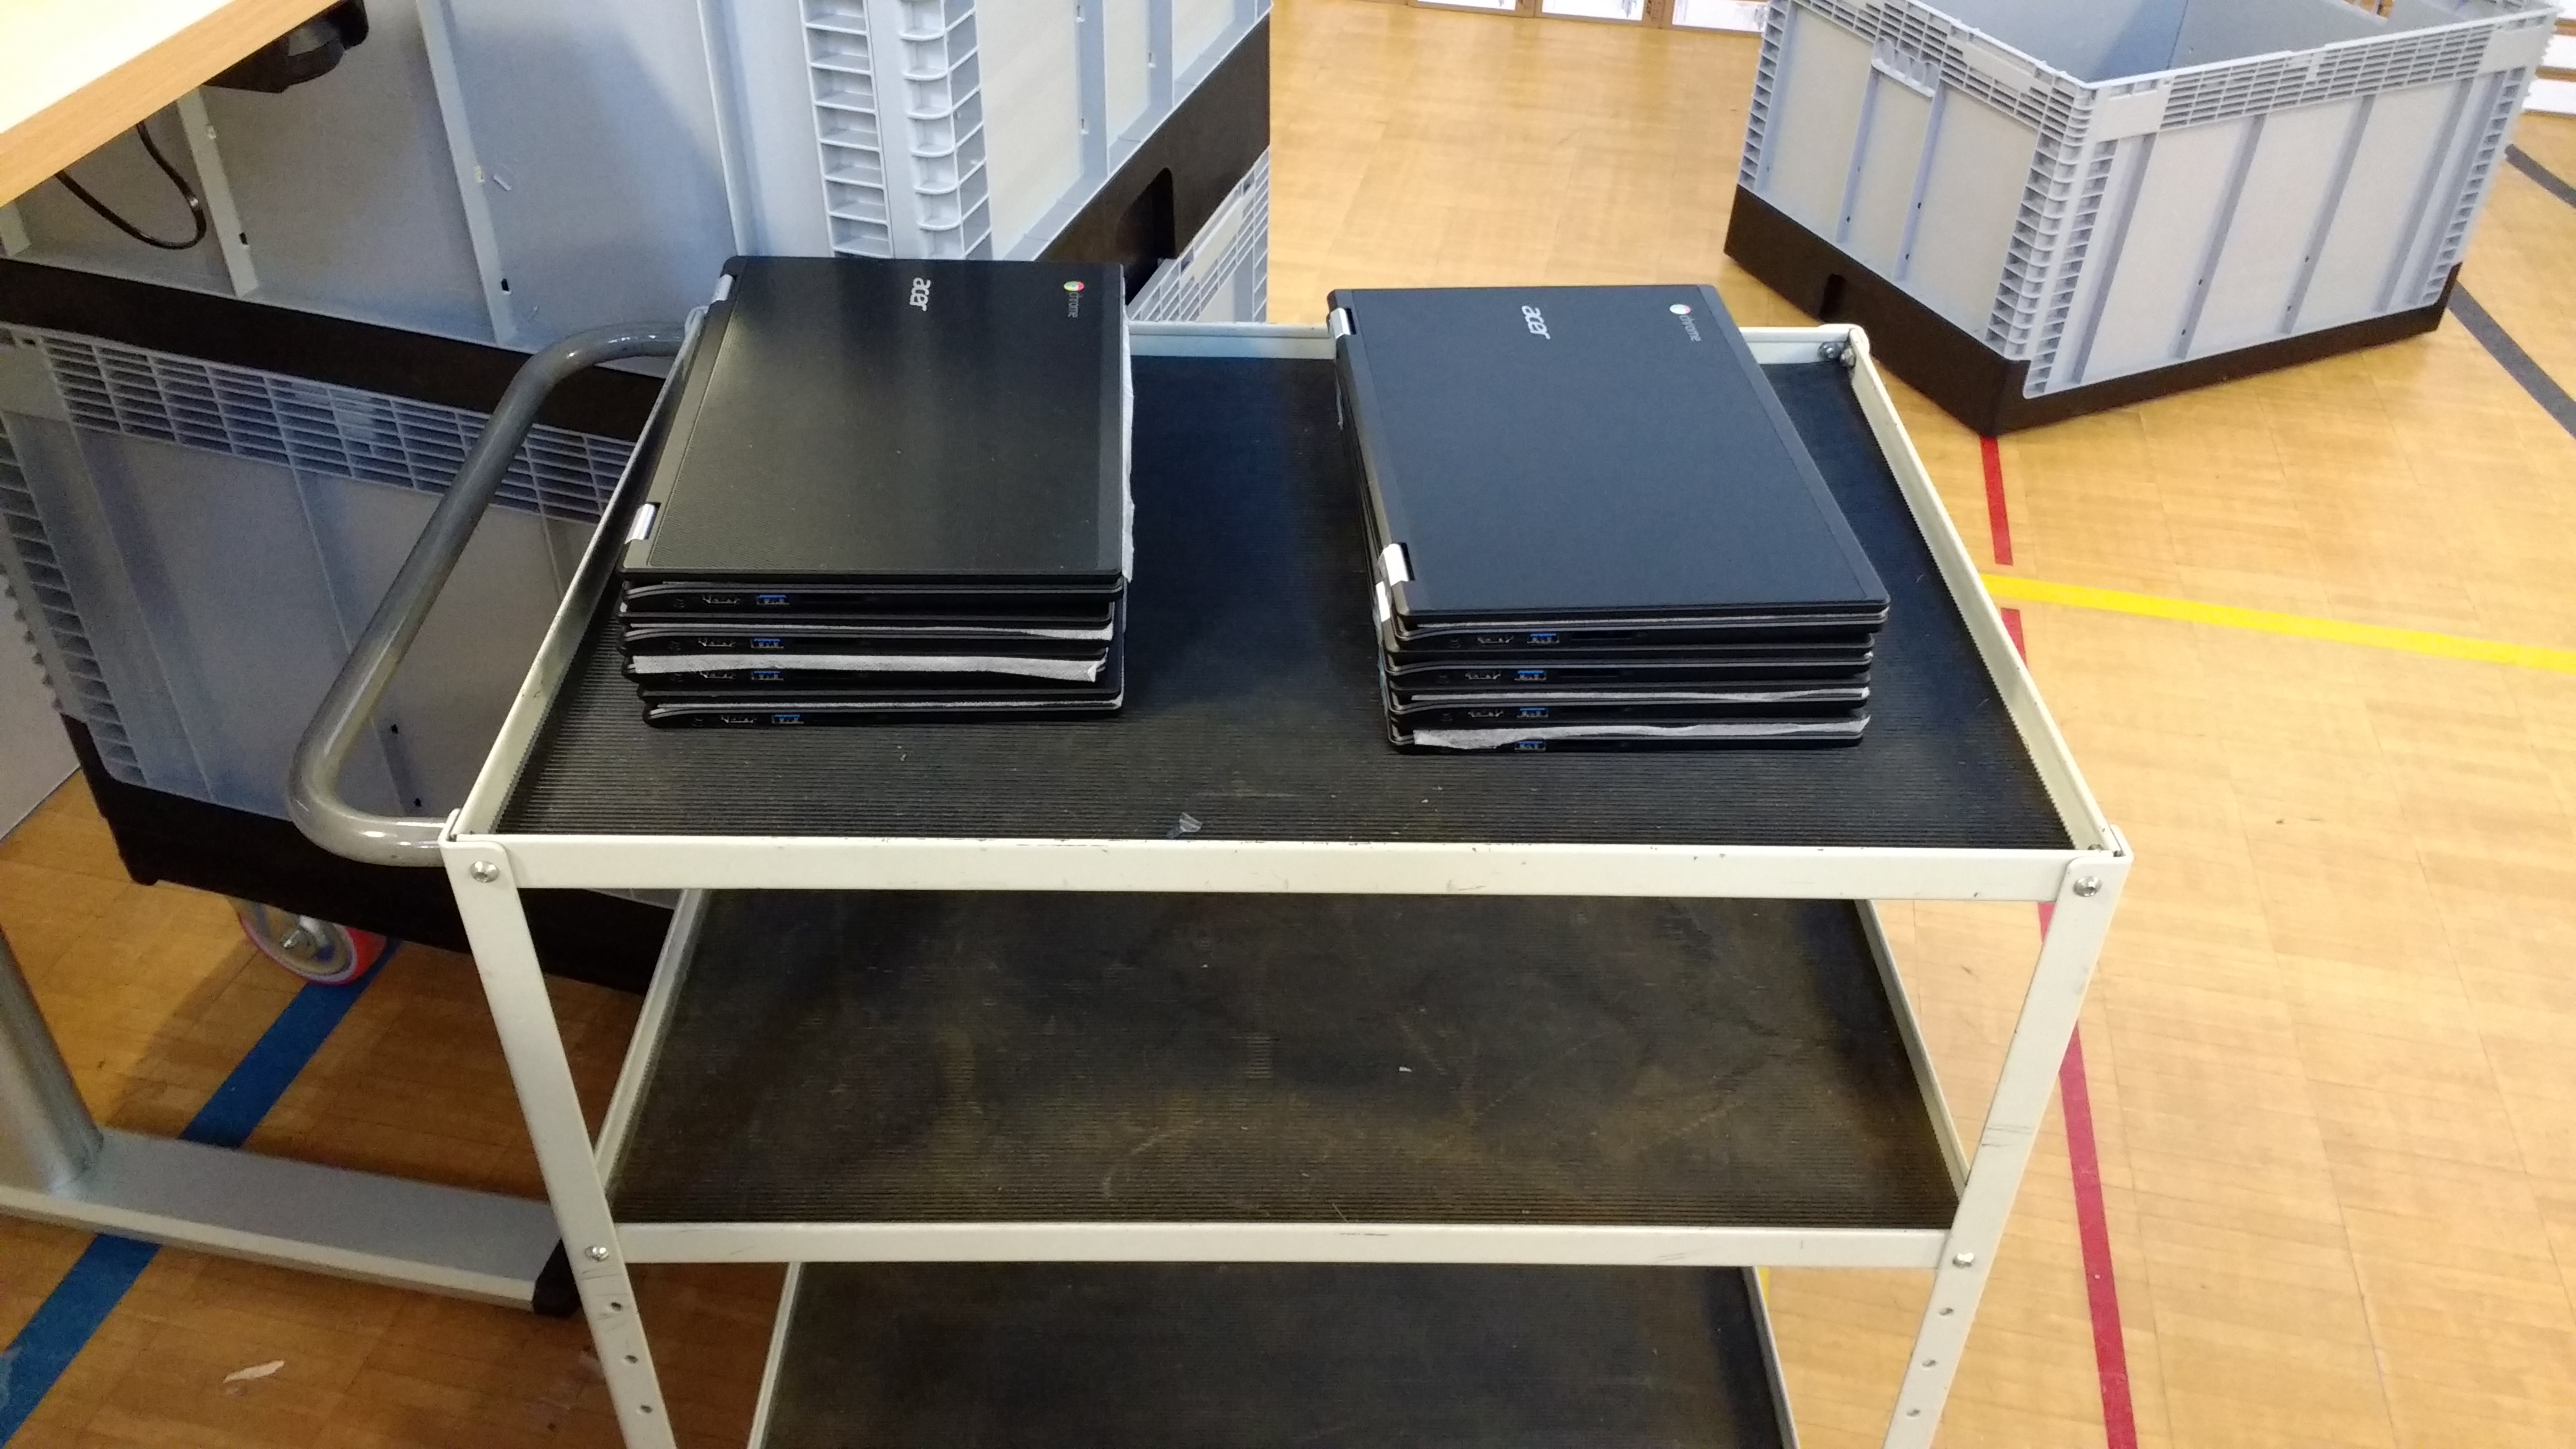 Trolley with unpacked Chromebooks